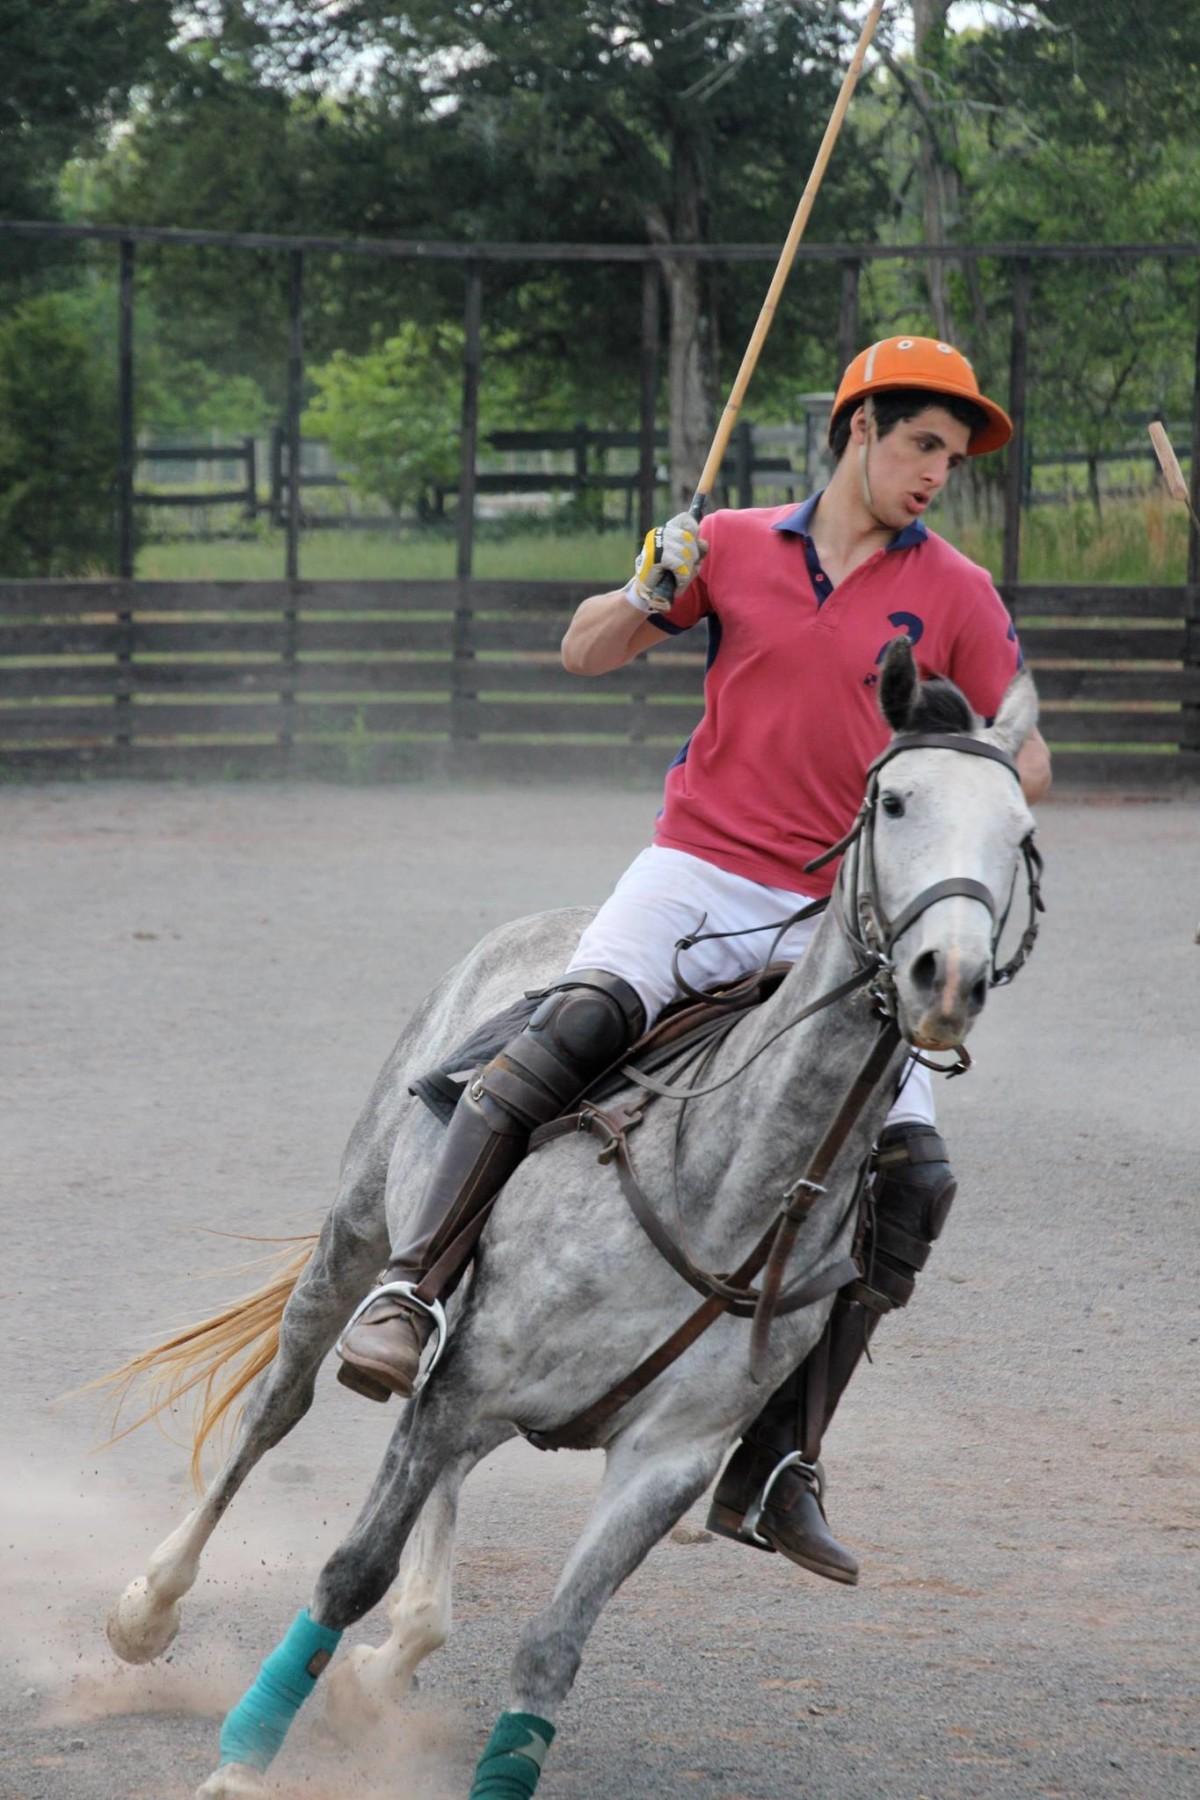 Sander Altman has been playing polo since the beginning of 2014. "It’s awesome having that giant animal do do exactly what you want it to do," Altman said.